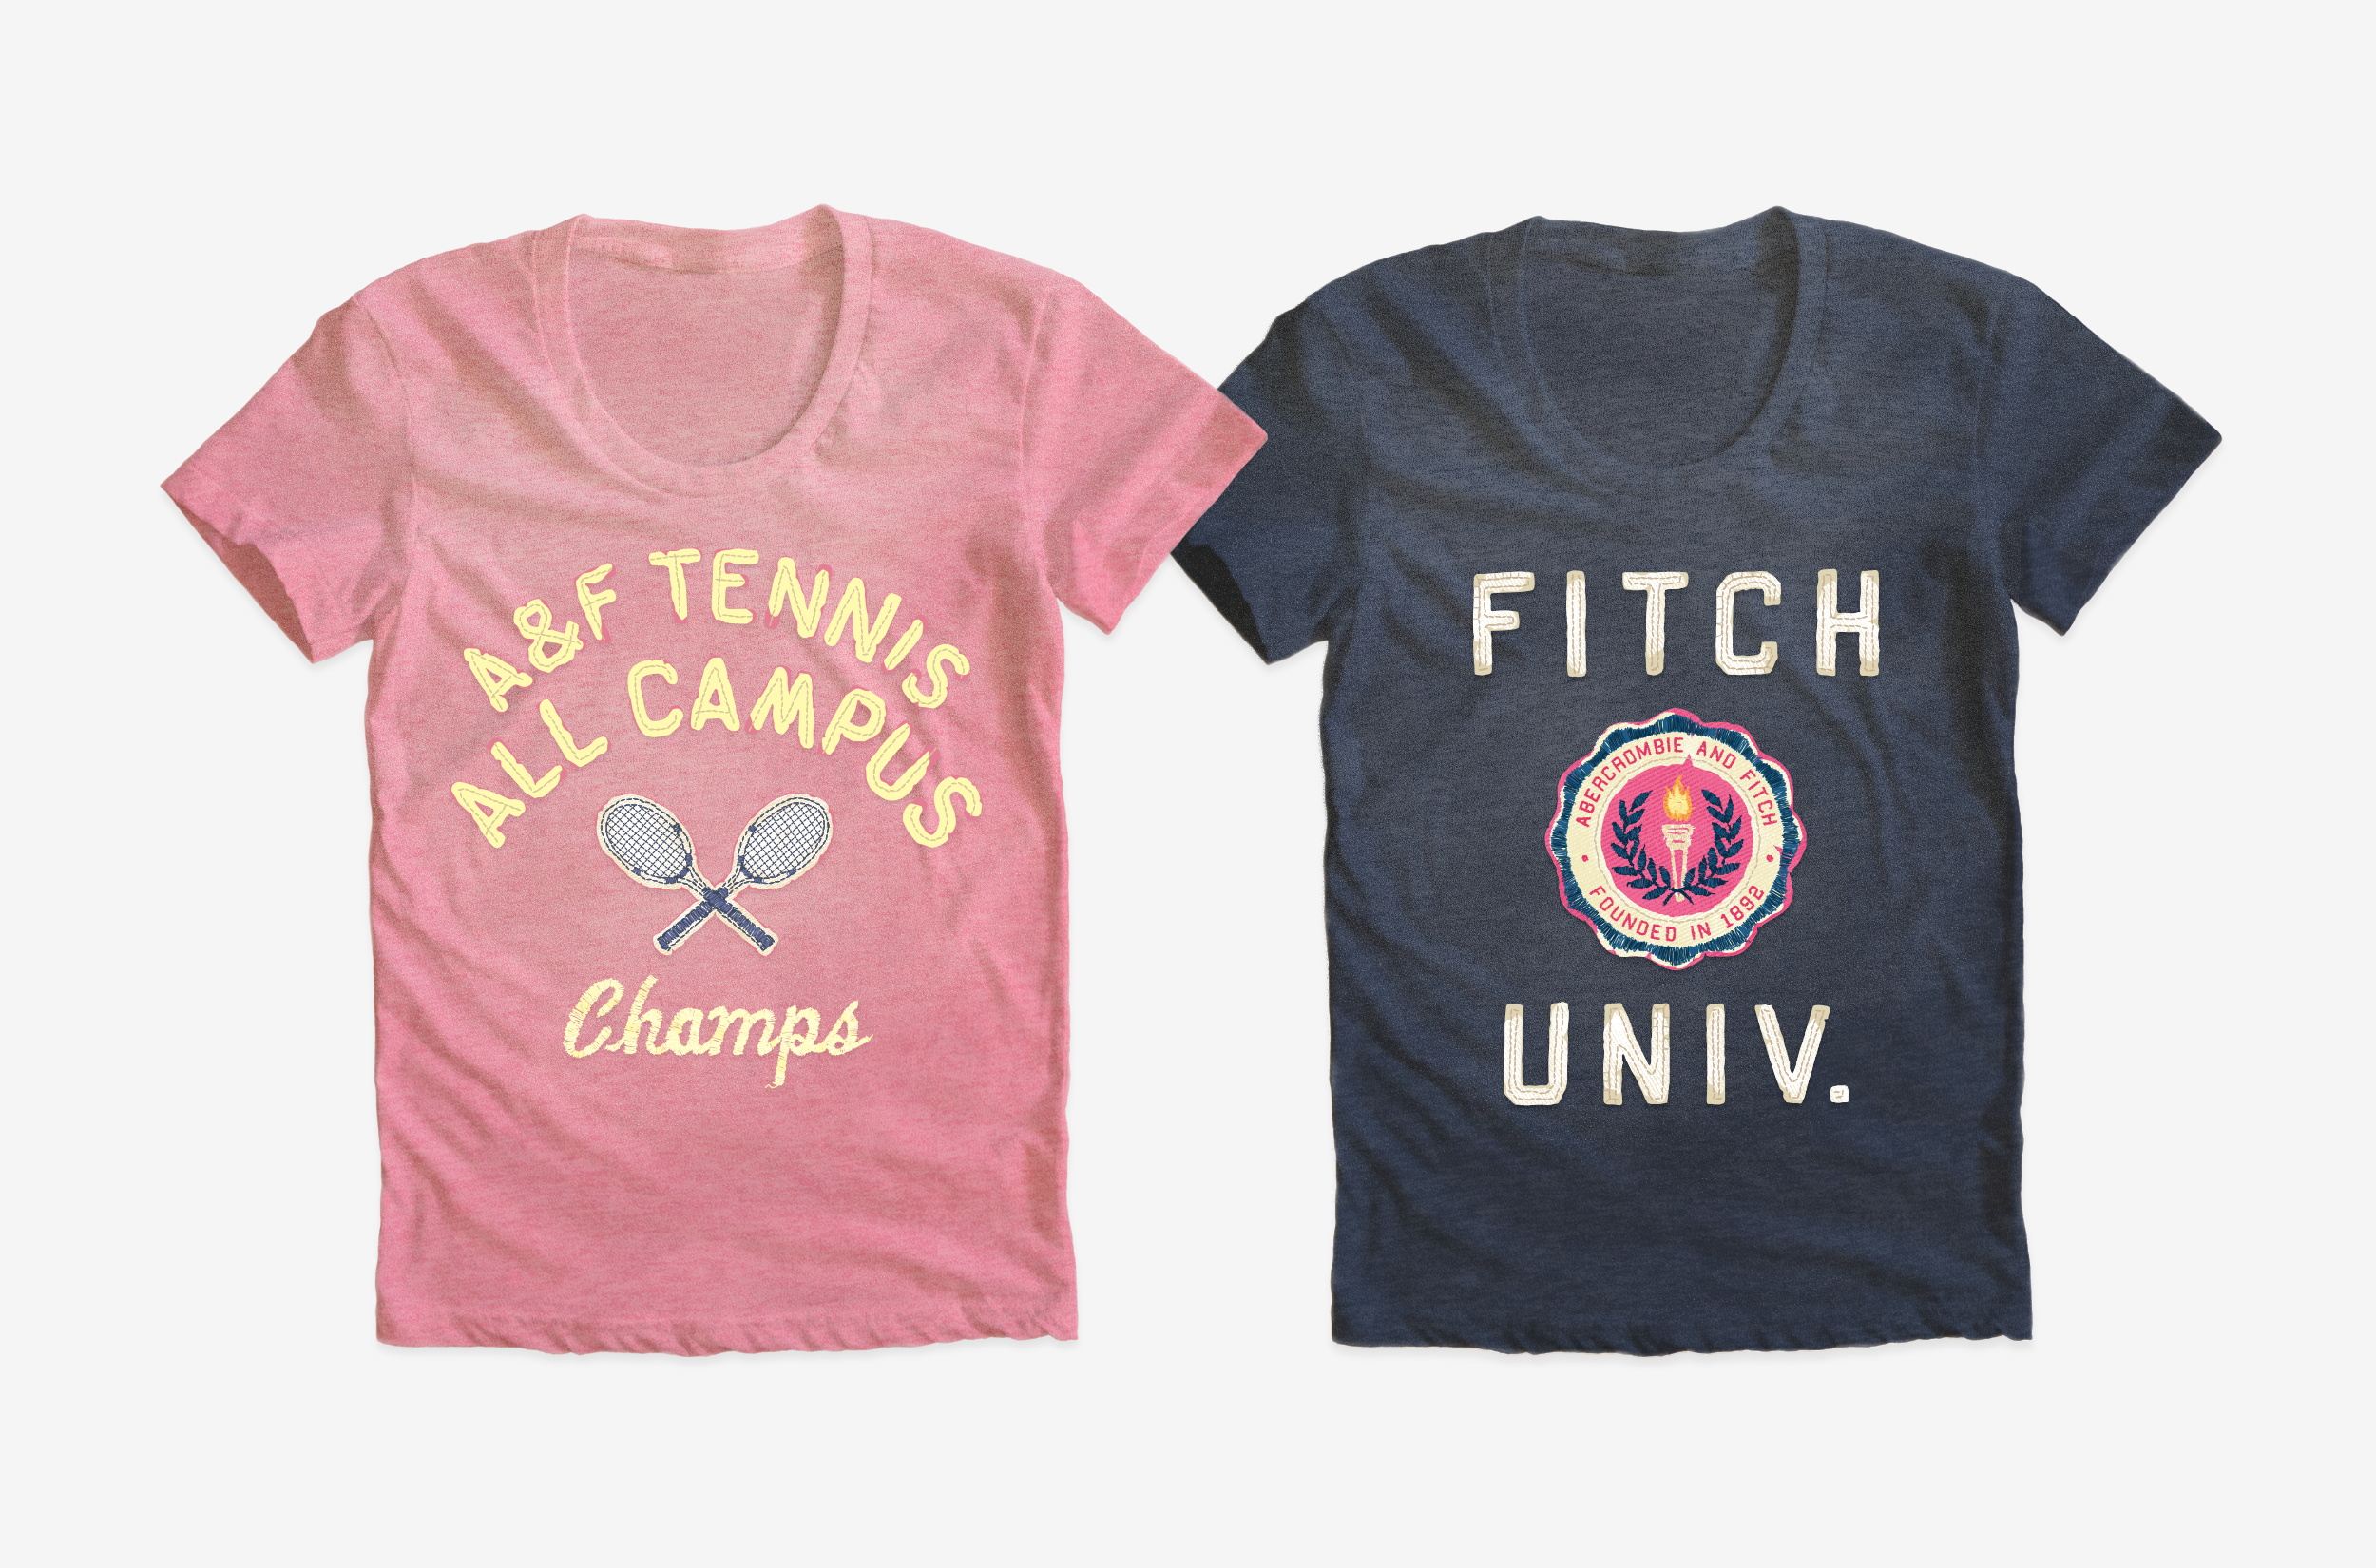  ABERCROMBIE &amp; FITCH / Womens t-shirt graphics 